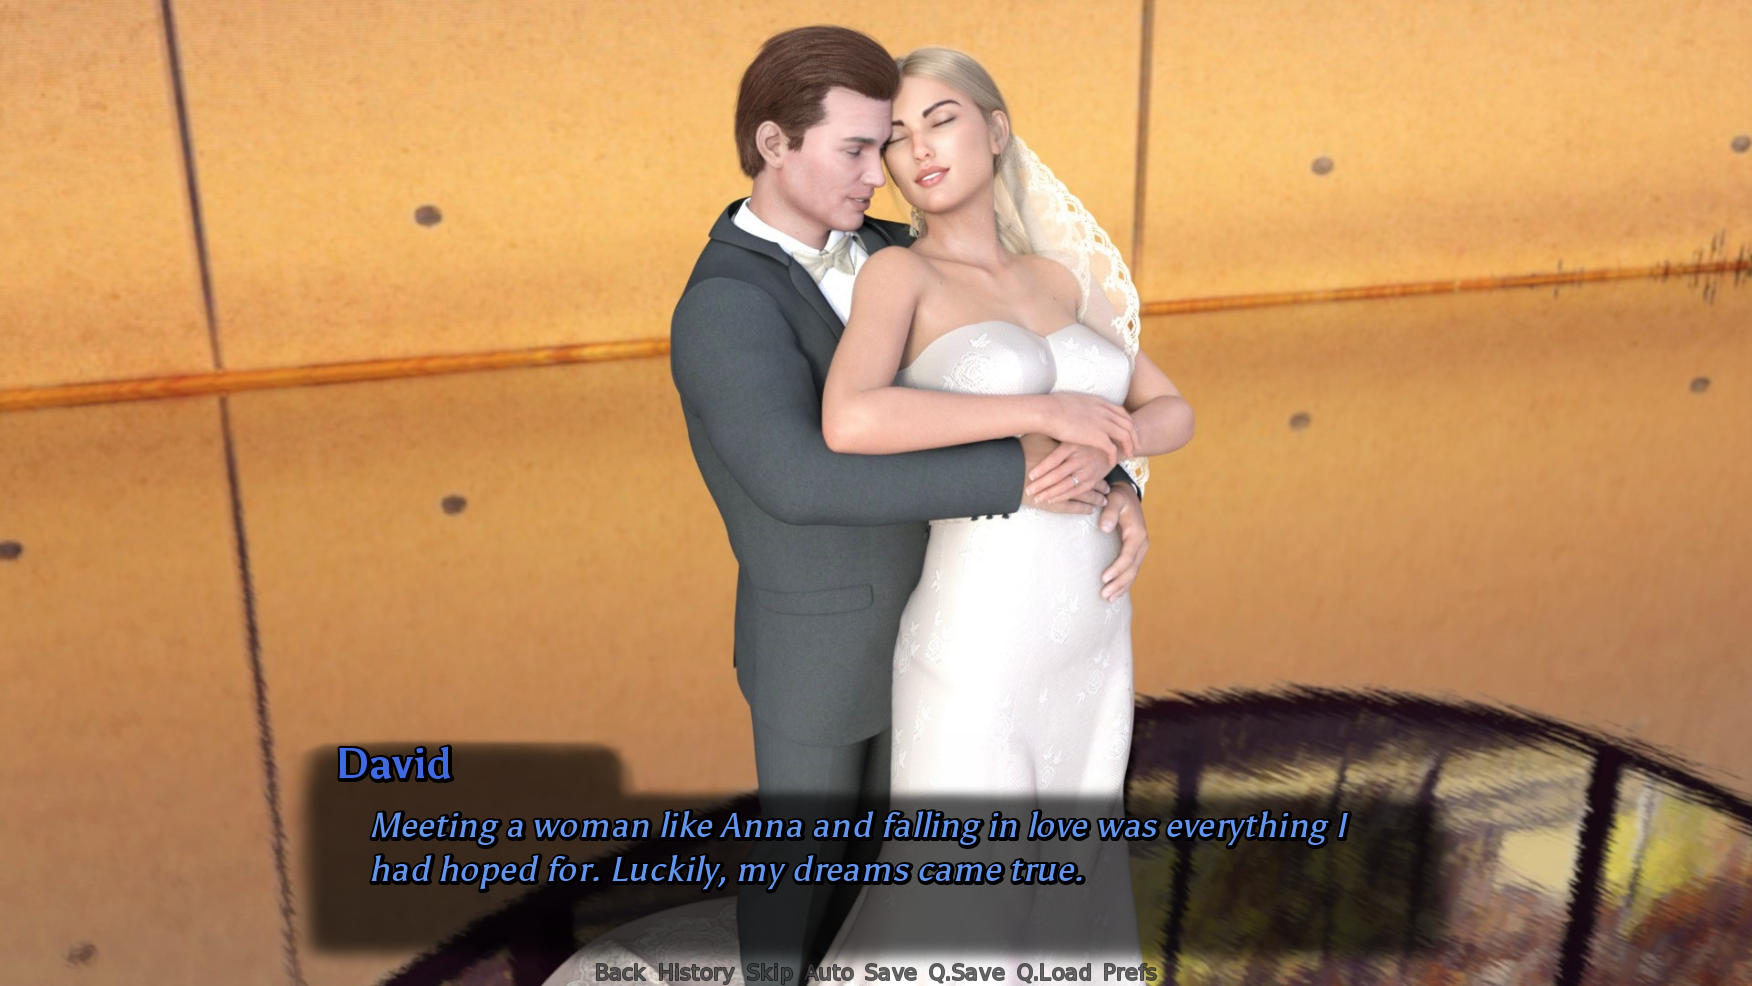 A Perfect Marriage v1.0 - free game download, reviews, mega